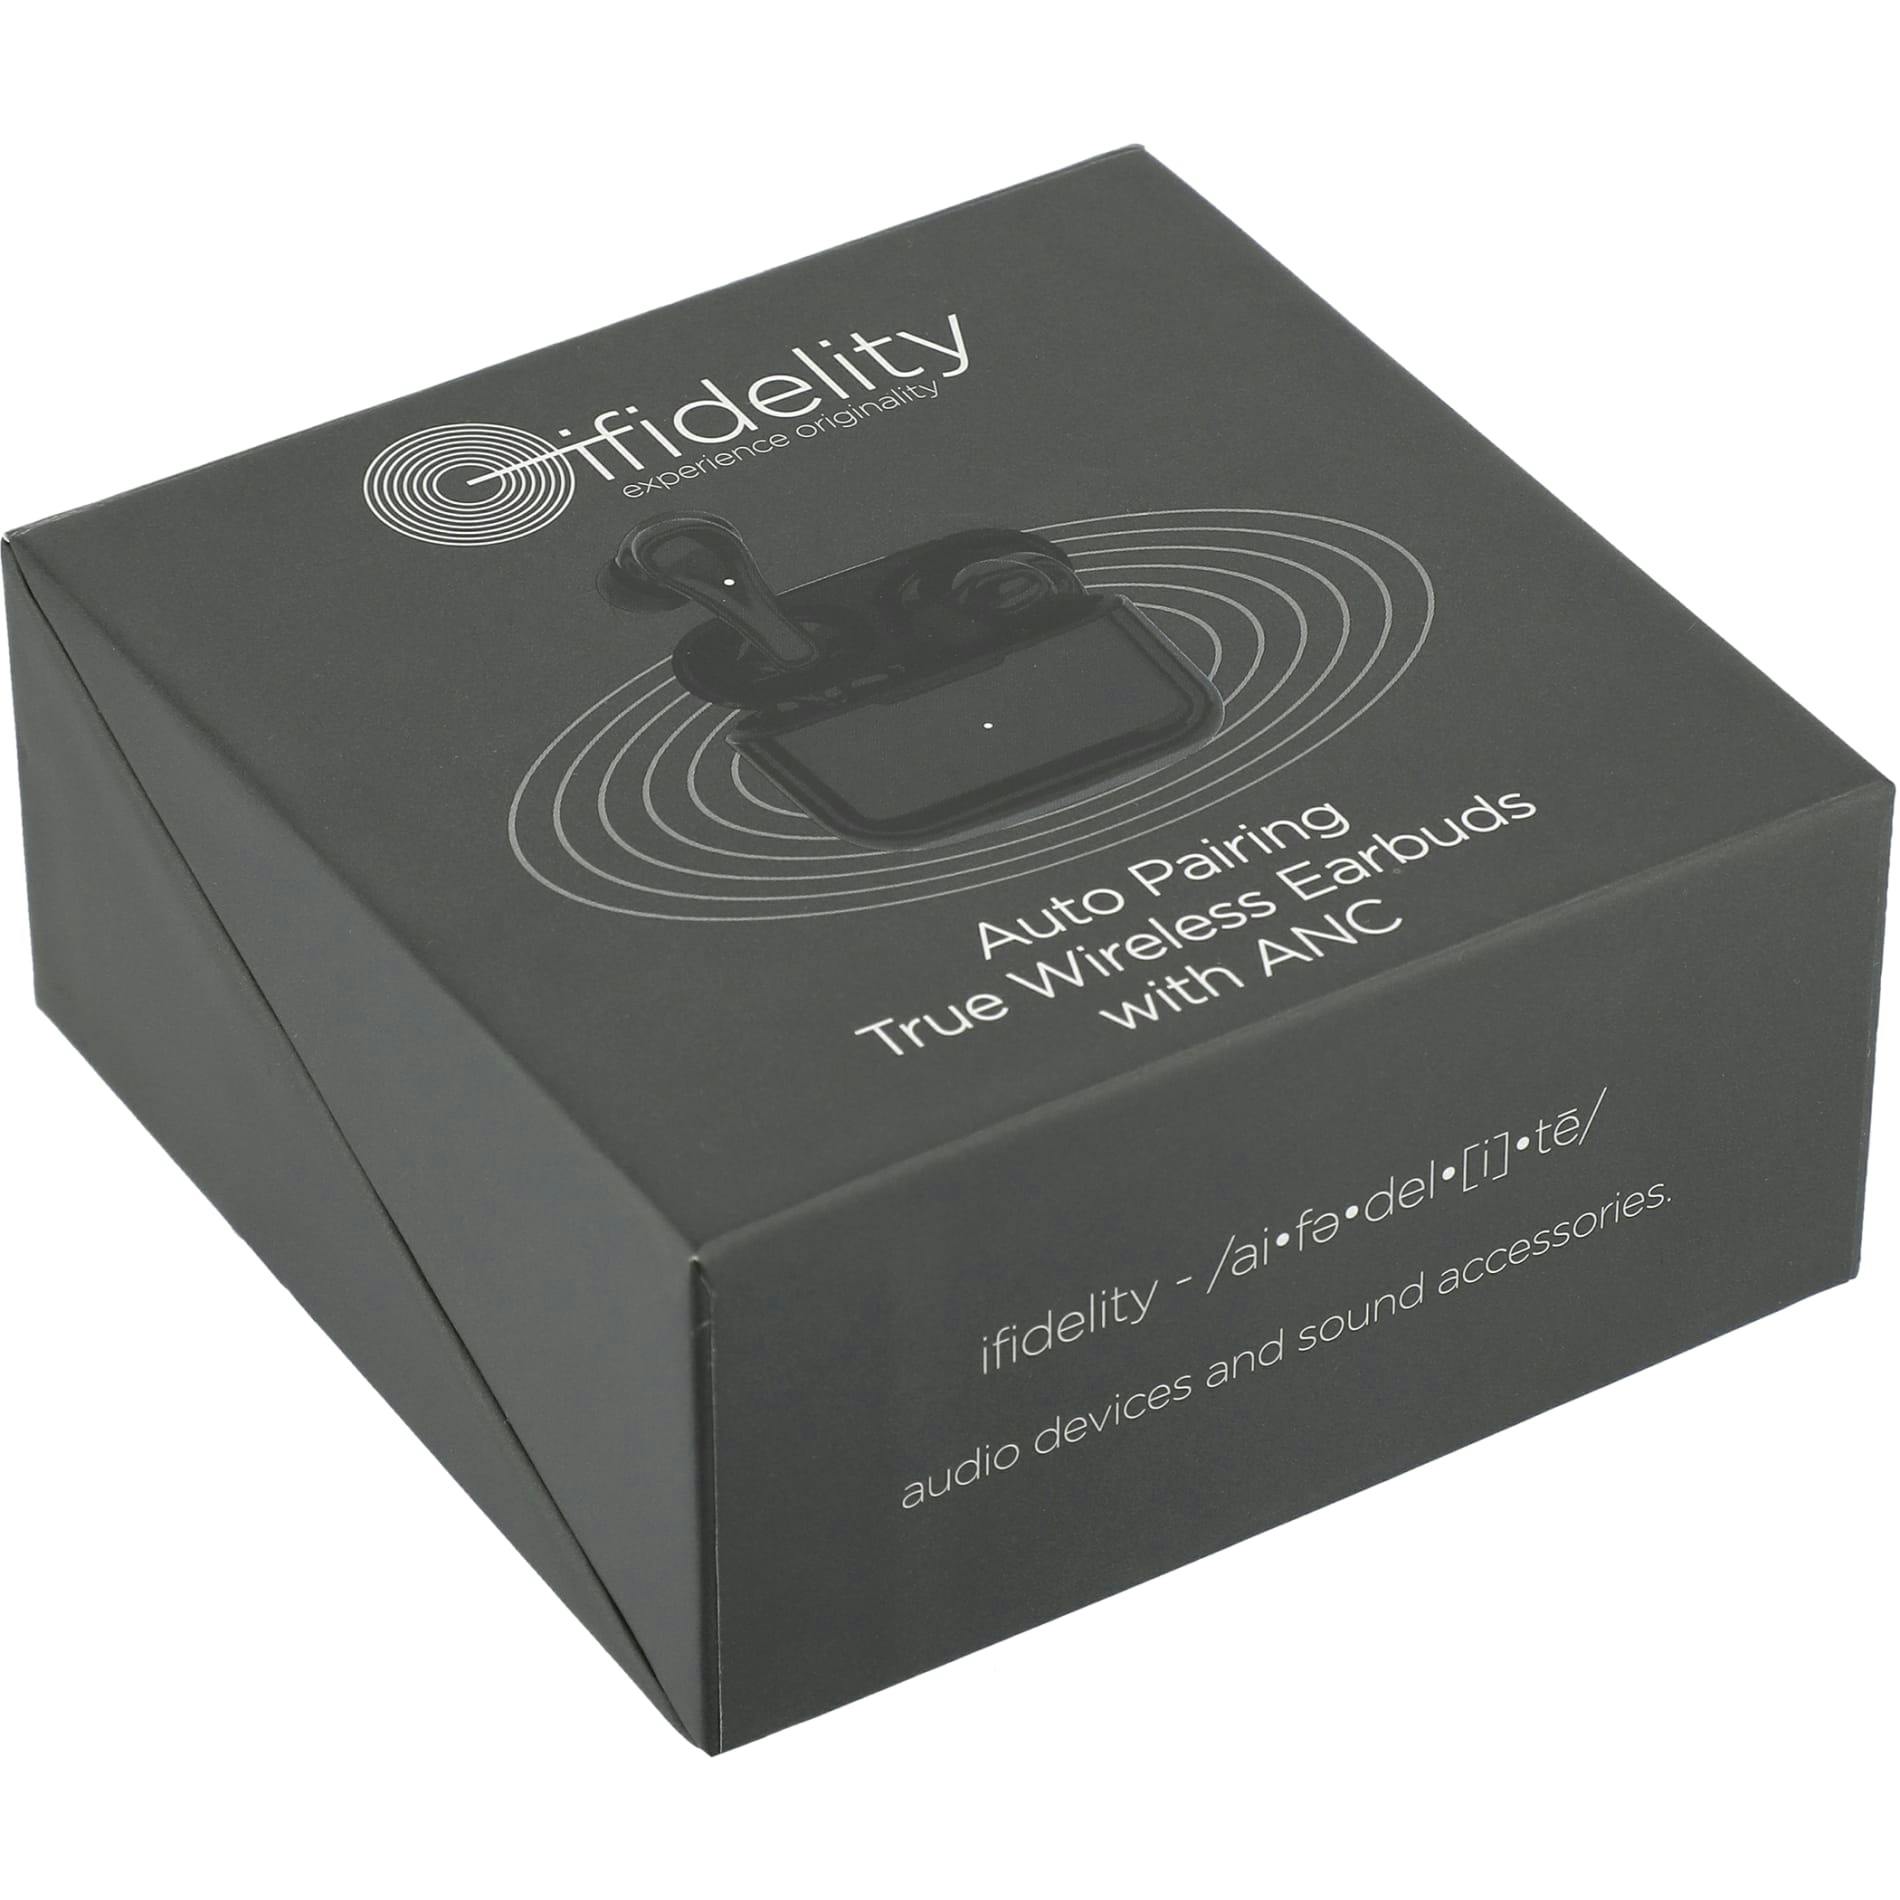 Ifidelity Auto Pair True Wireless Earbuds with ANC - additional Image 1